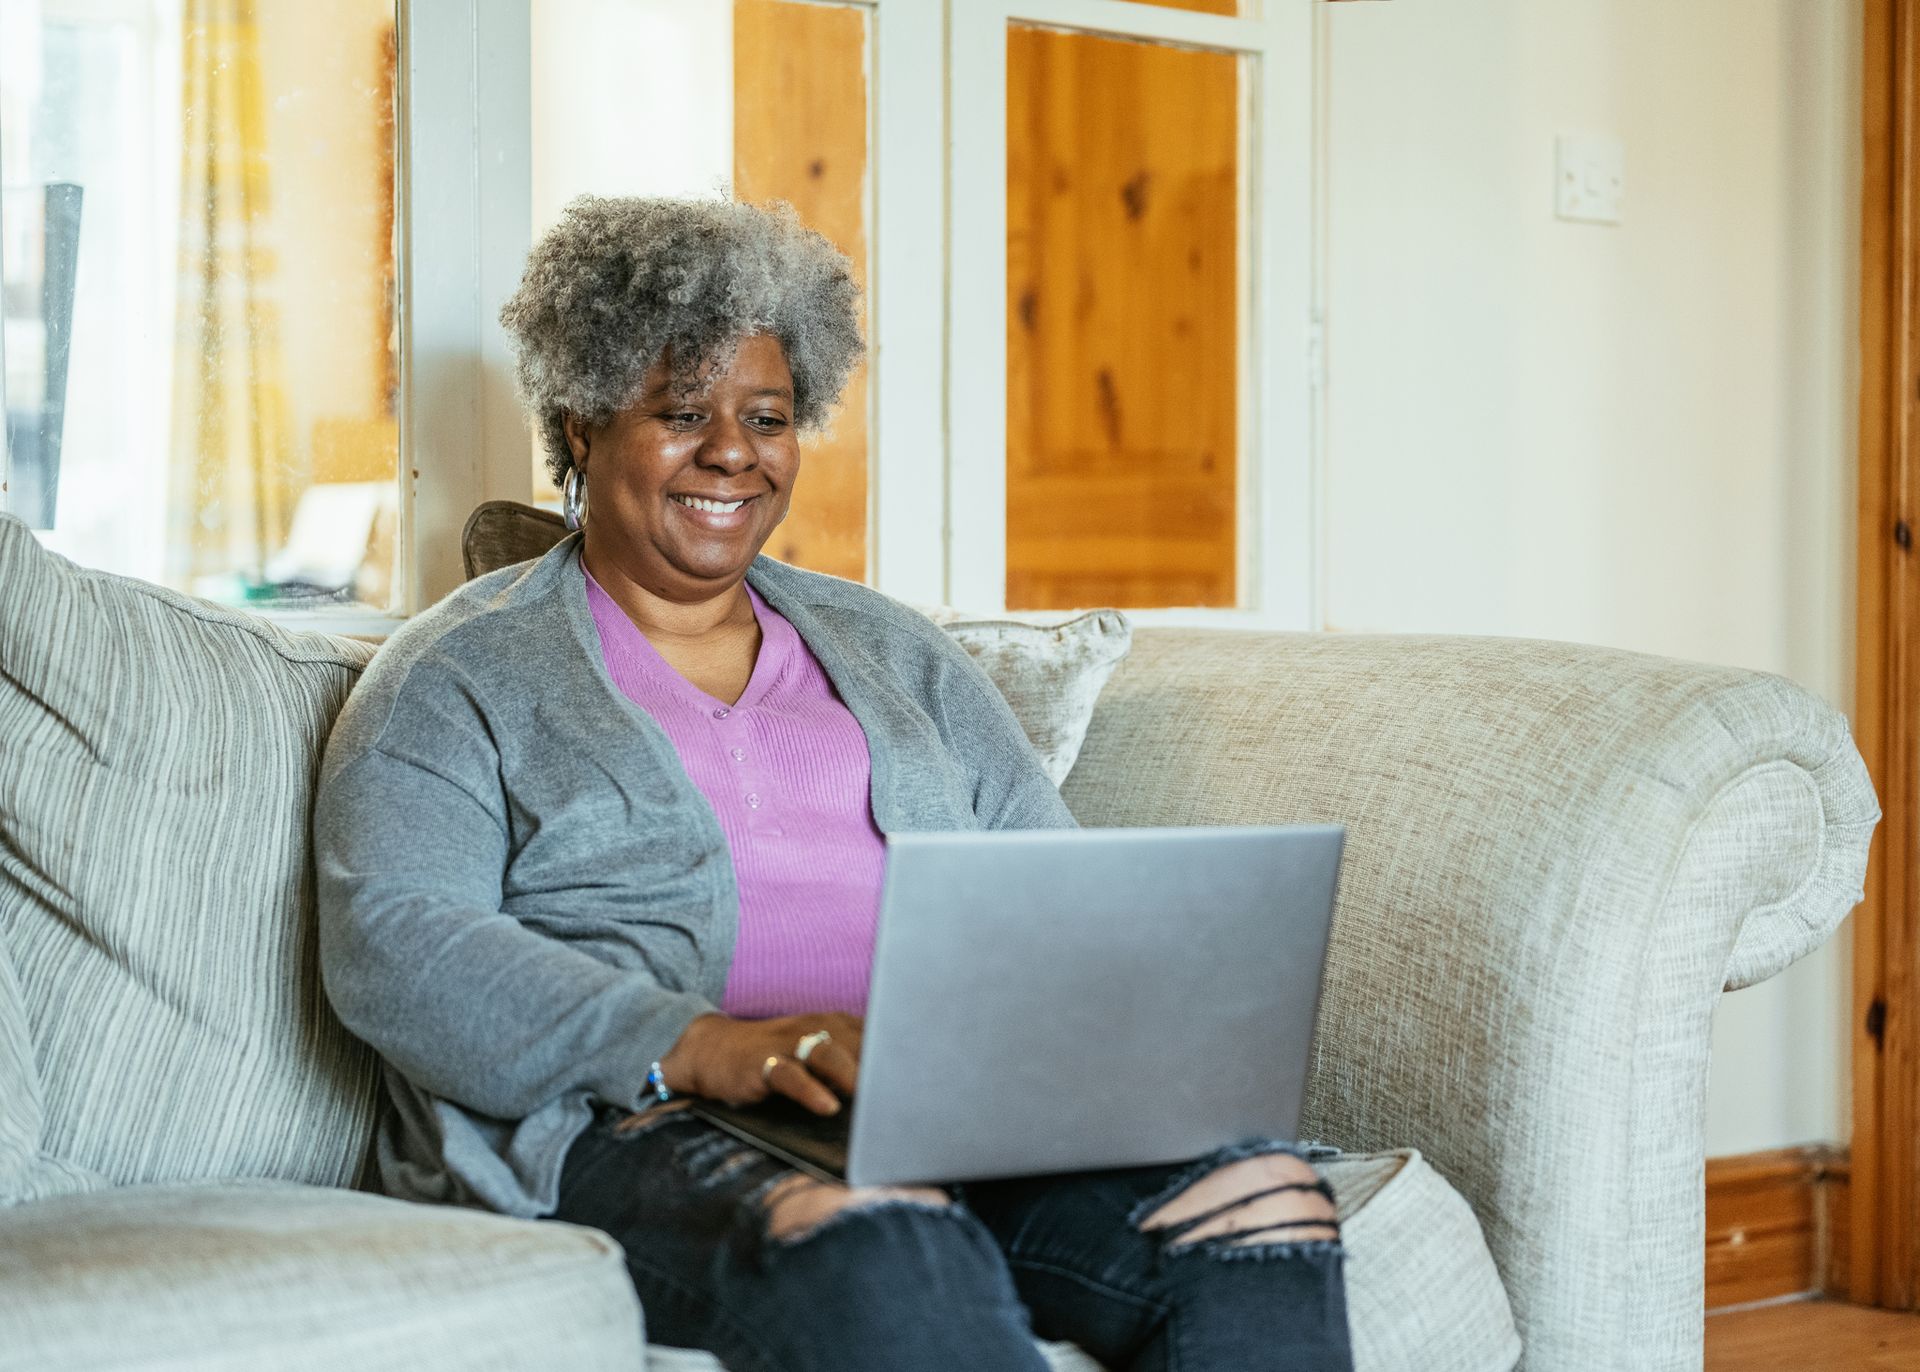 Elderly black woman on computer in home on couch